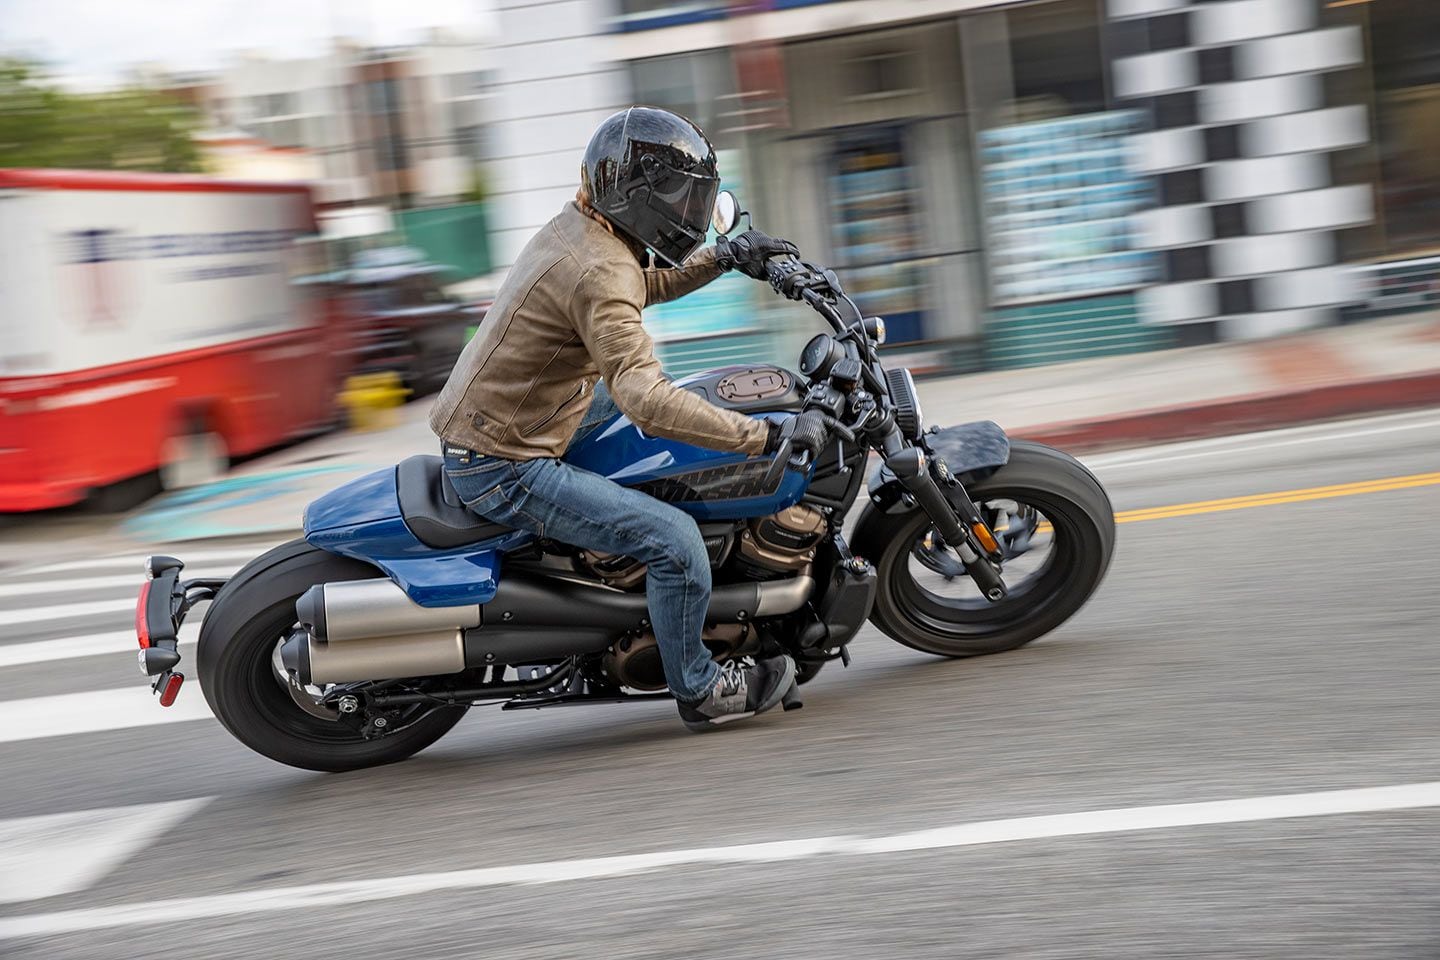 The Sportster S feels right at home on city streets. The real fun comes when you can crack the throttle on the Revolution Max 1250T engine.